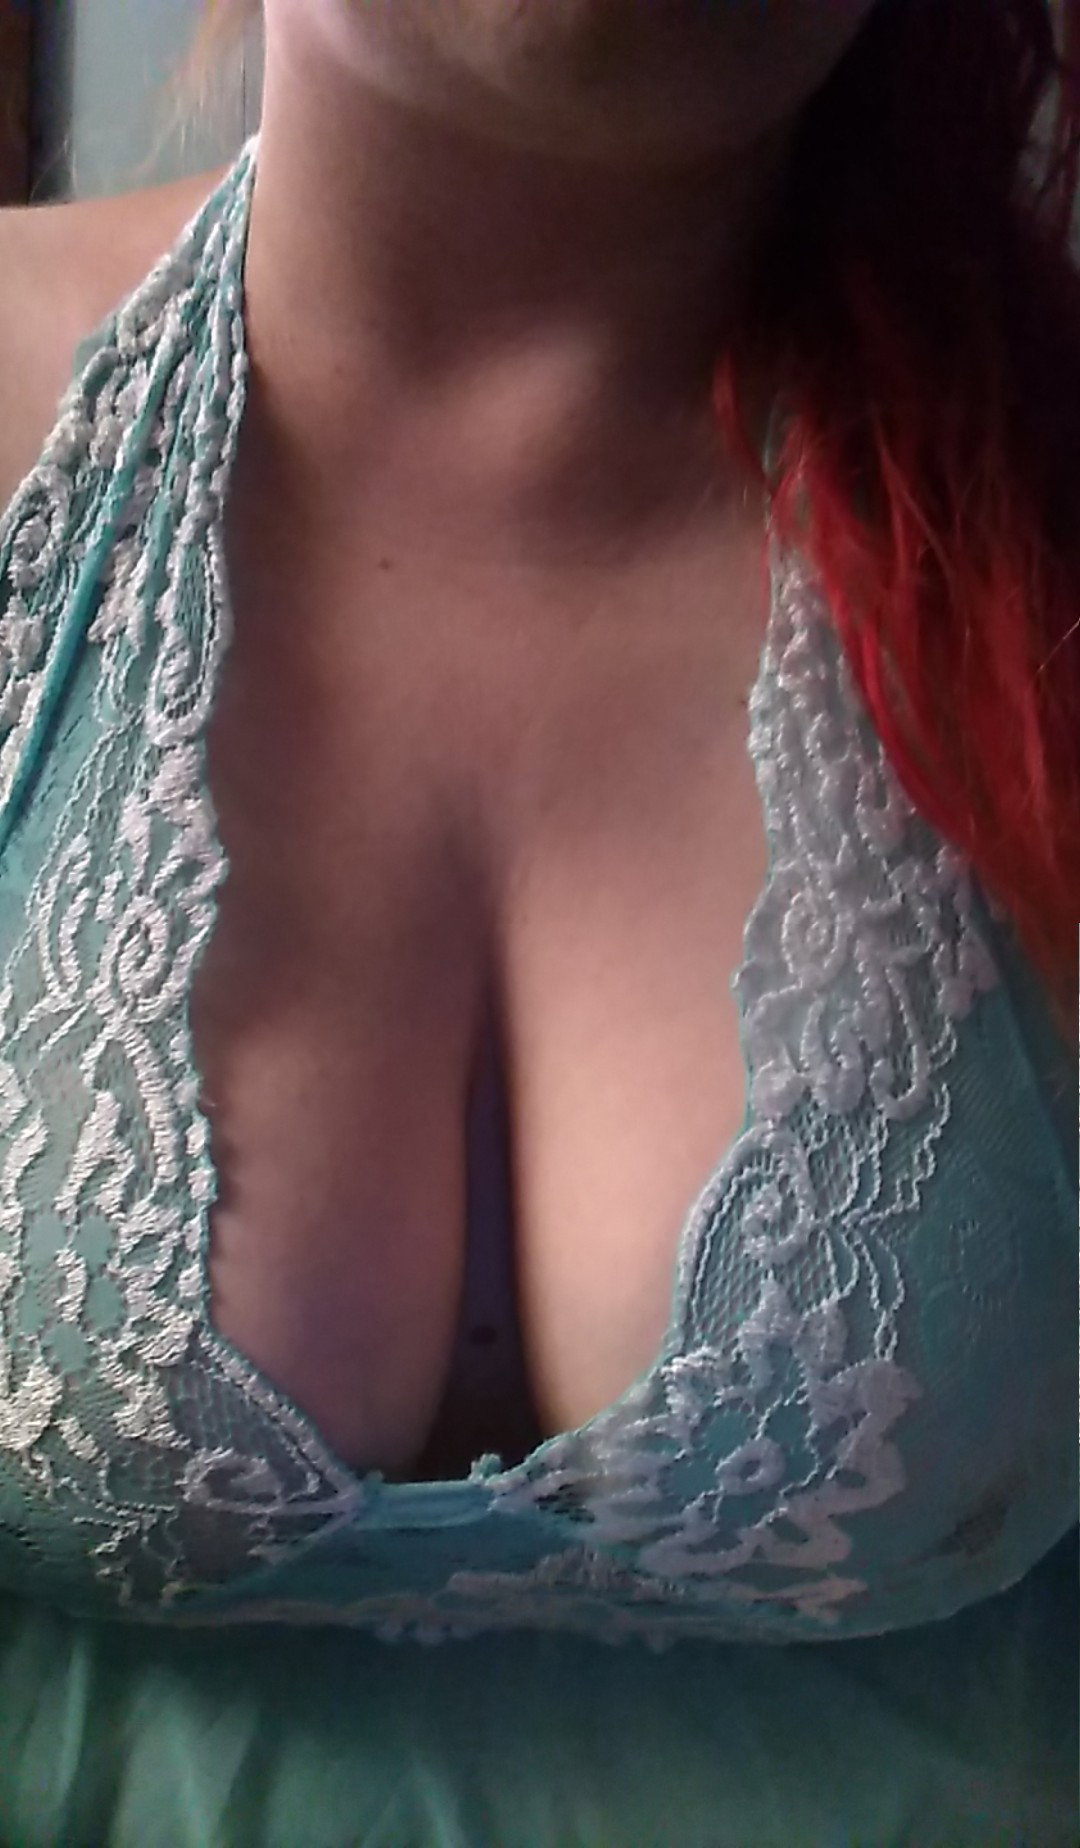 Photo by Goddess_B with the username @worshipme4life, who is a verified user,  December 9, 2019 at 4:02 PM and the text says 'Worship my beautiful breasts while you stroke and send my pets!'